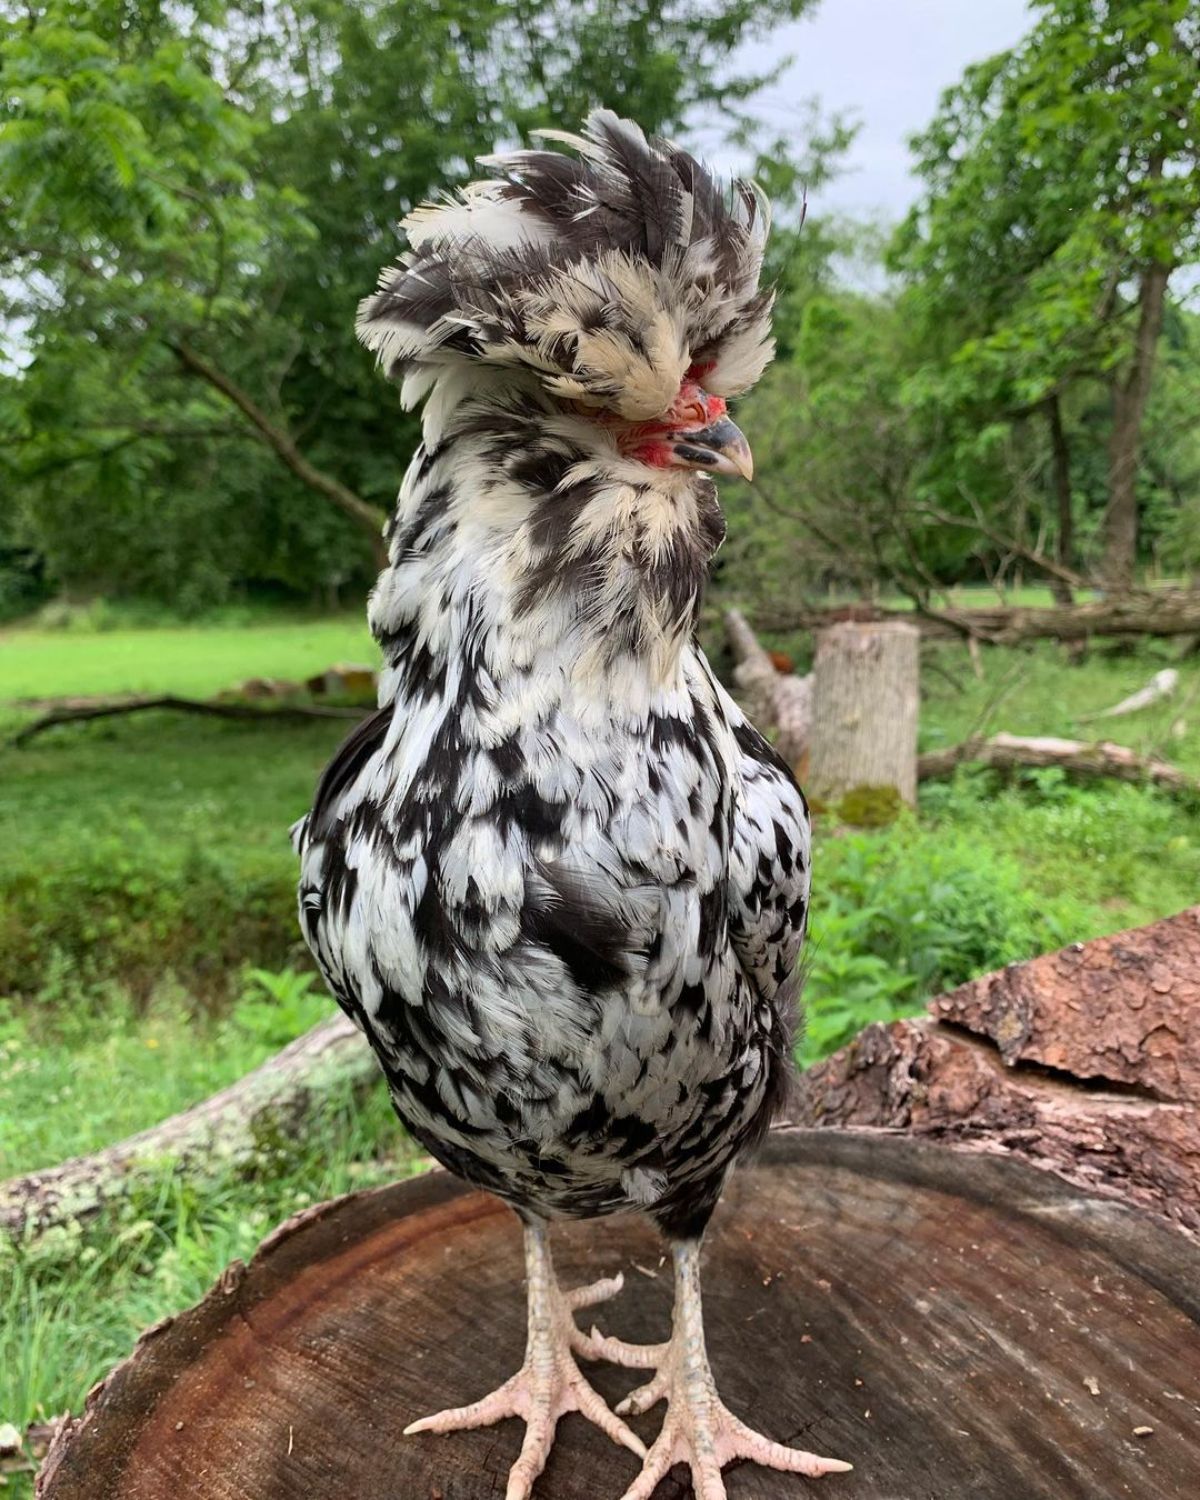 An adorable Mottled Houdan hen perched on a tree stump.